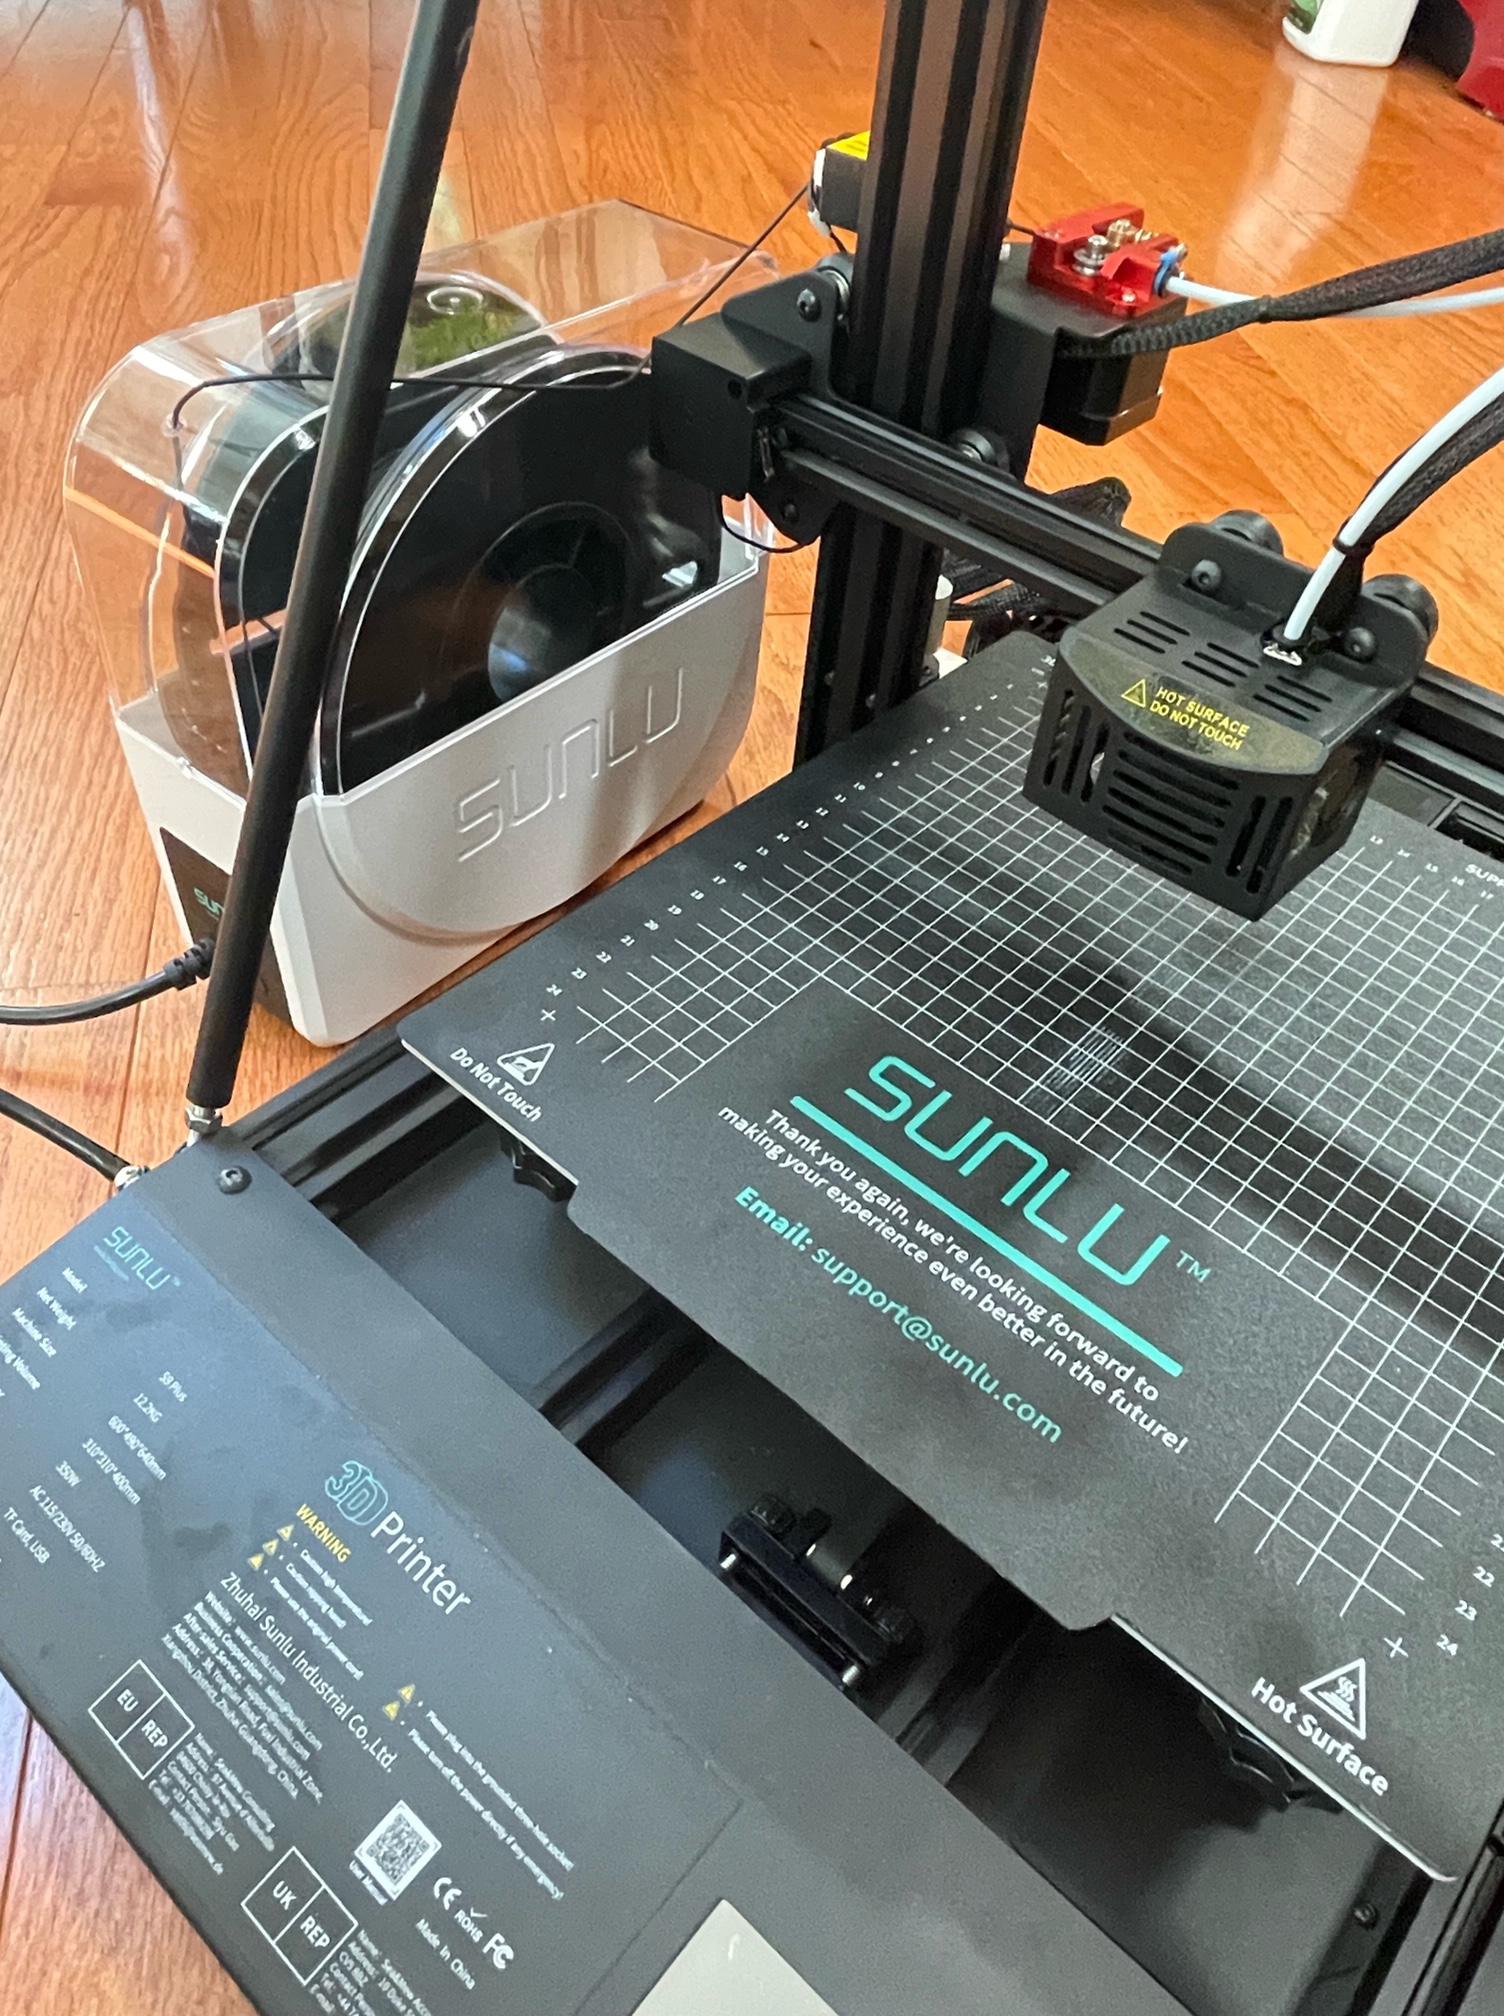 Sunlu S9 plus 3D printer review – Powerful 3D printing with oodles of  options! - The Gadgeteer